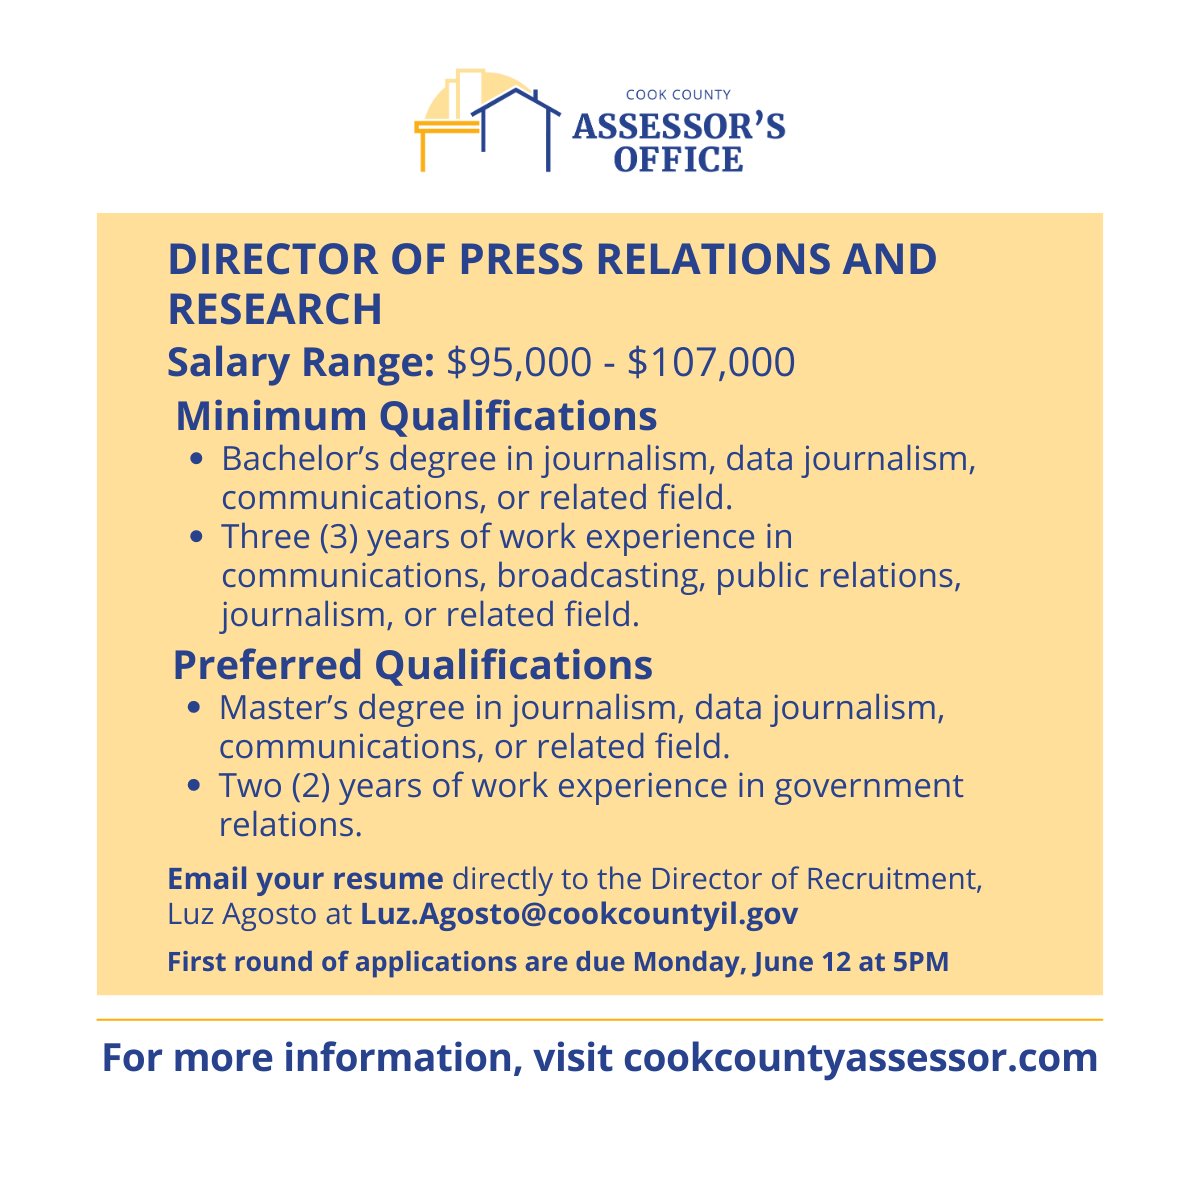 Do you have a background in journalism, press relations, and interest in local government? Then check out our job posting for Director of Press Relations & Research. cookcountyassessor.com/job-opportunit… Email resume to Luz.Agosto@cookcountyil.gov @cookcountygov @ChiCookWORKS